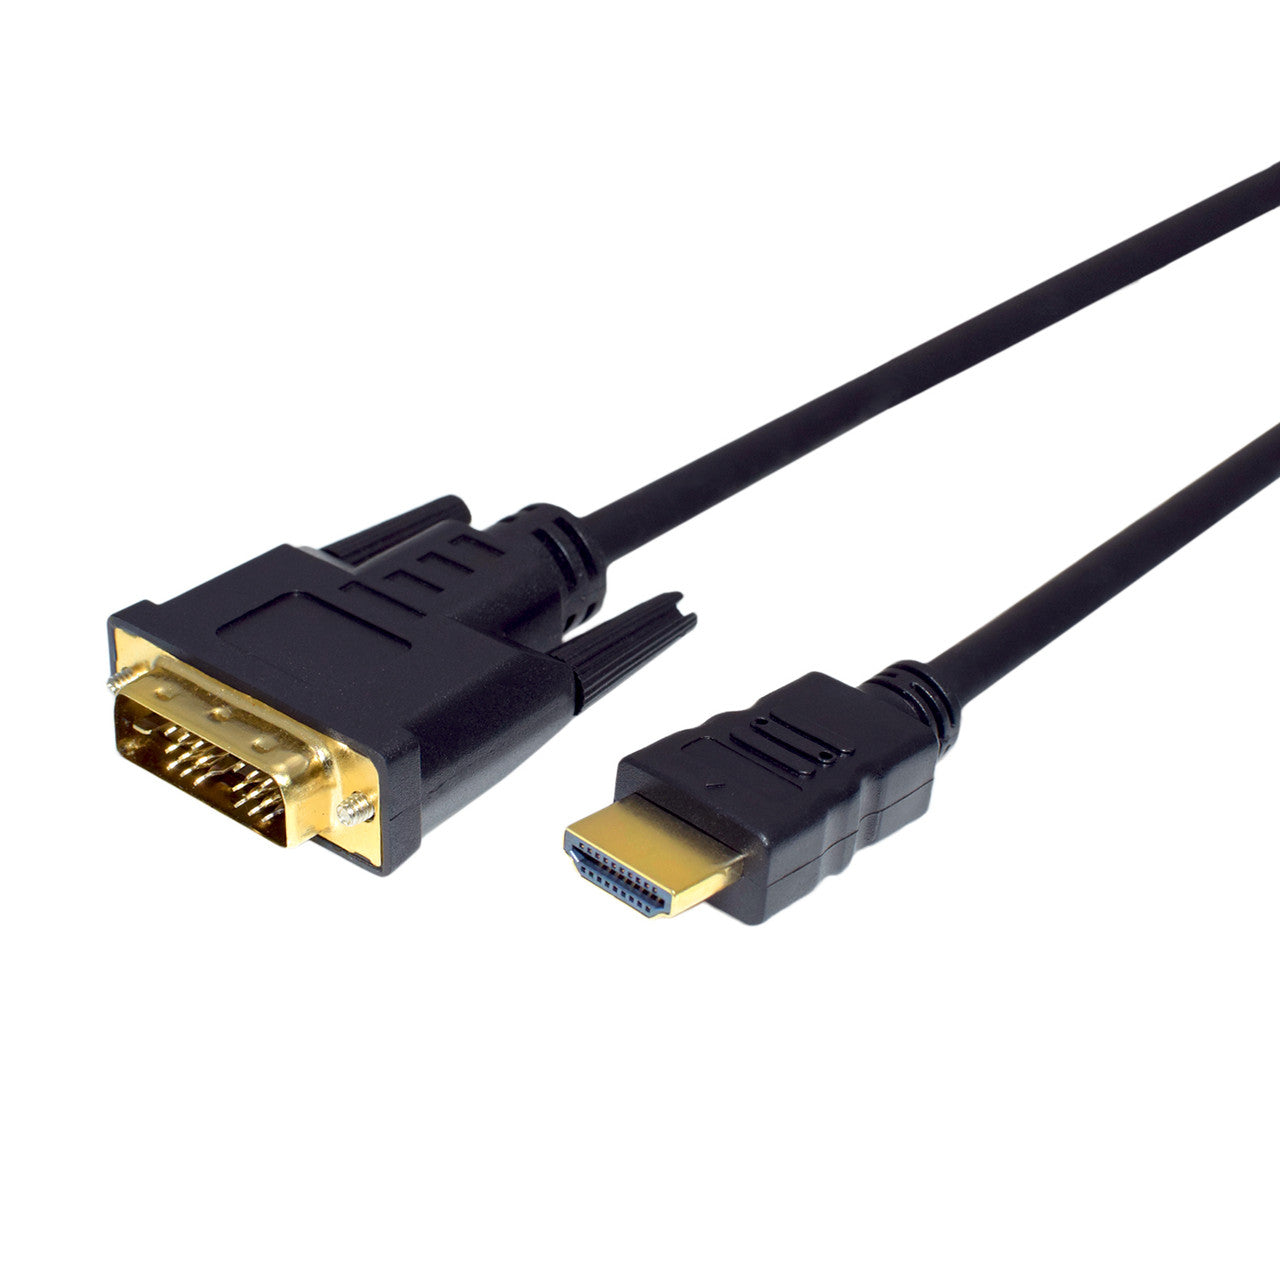 HIGH SPEED HDMI MALE TO DVI-D